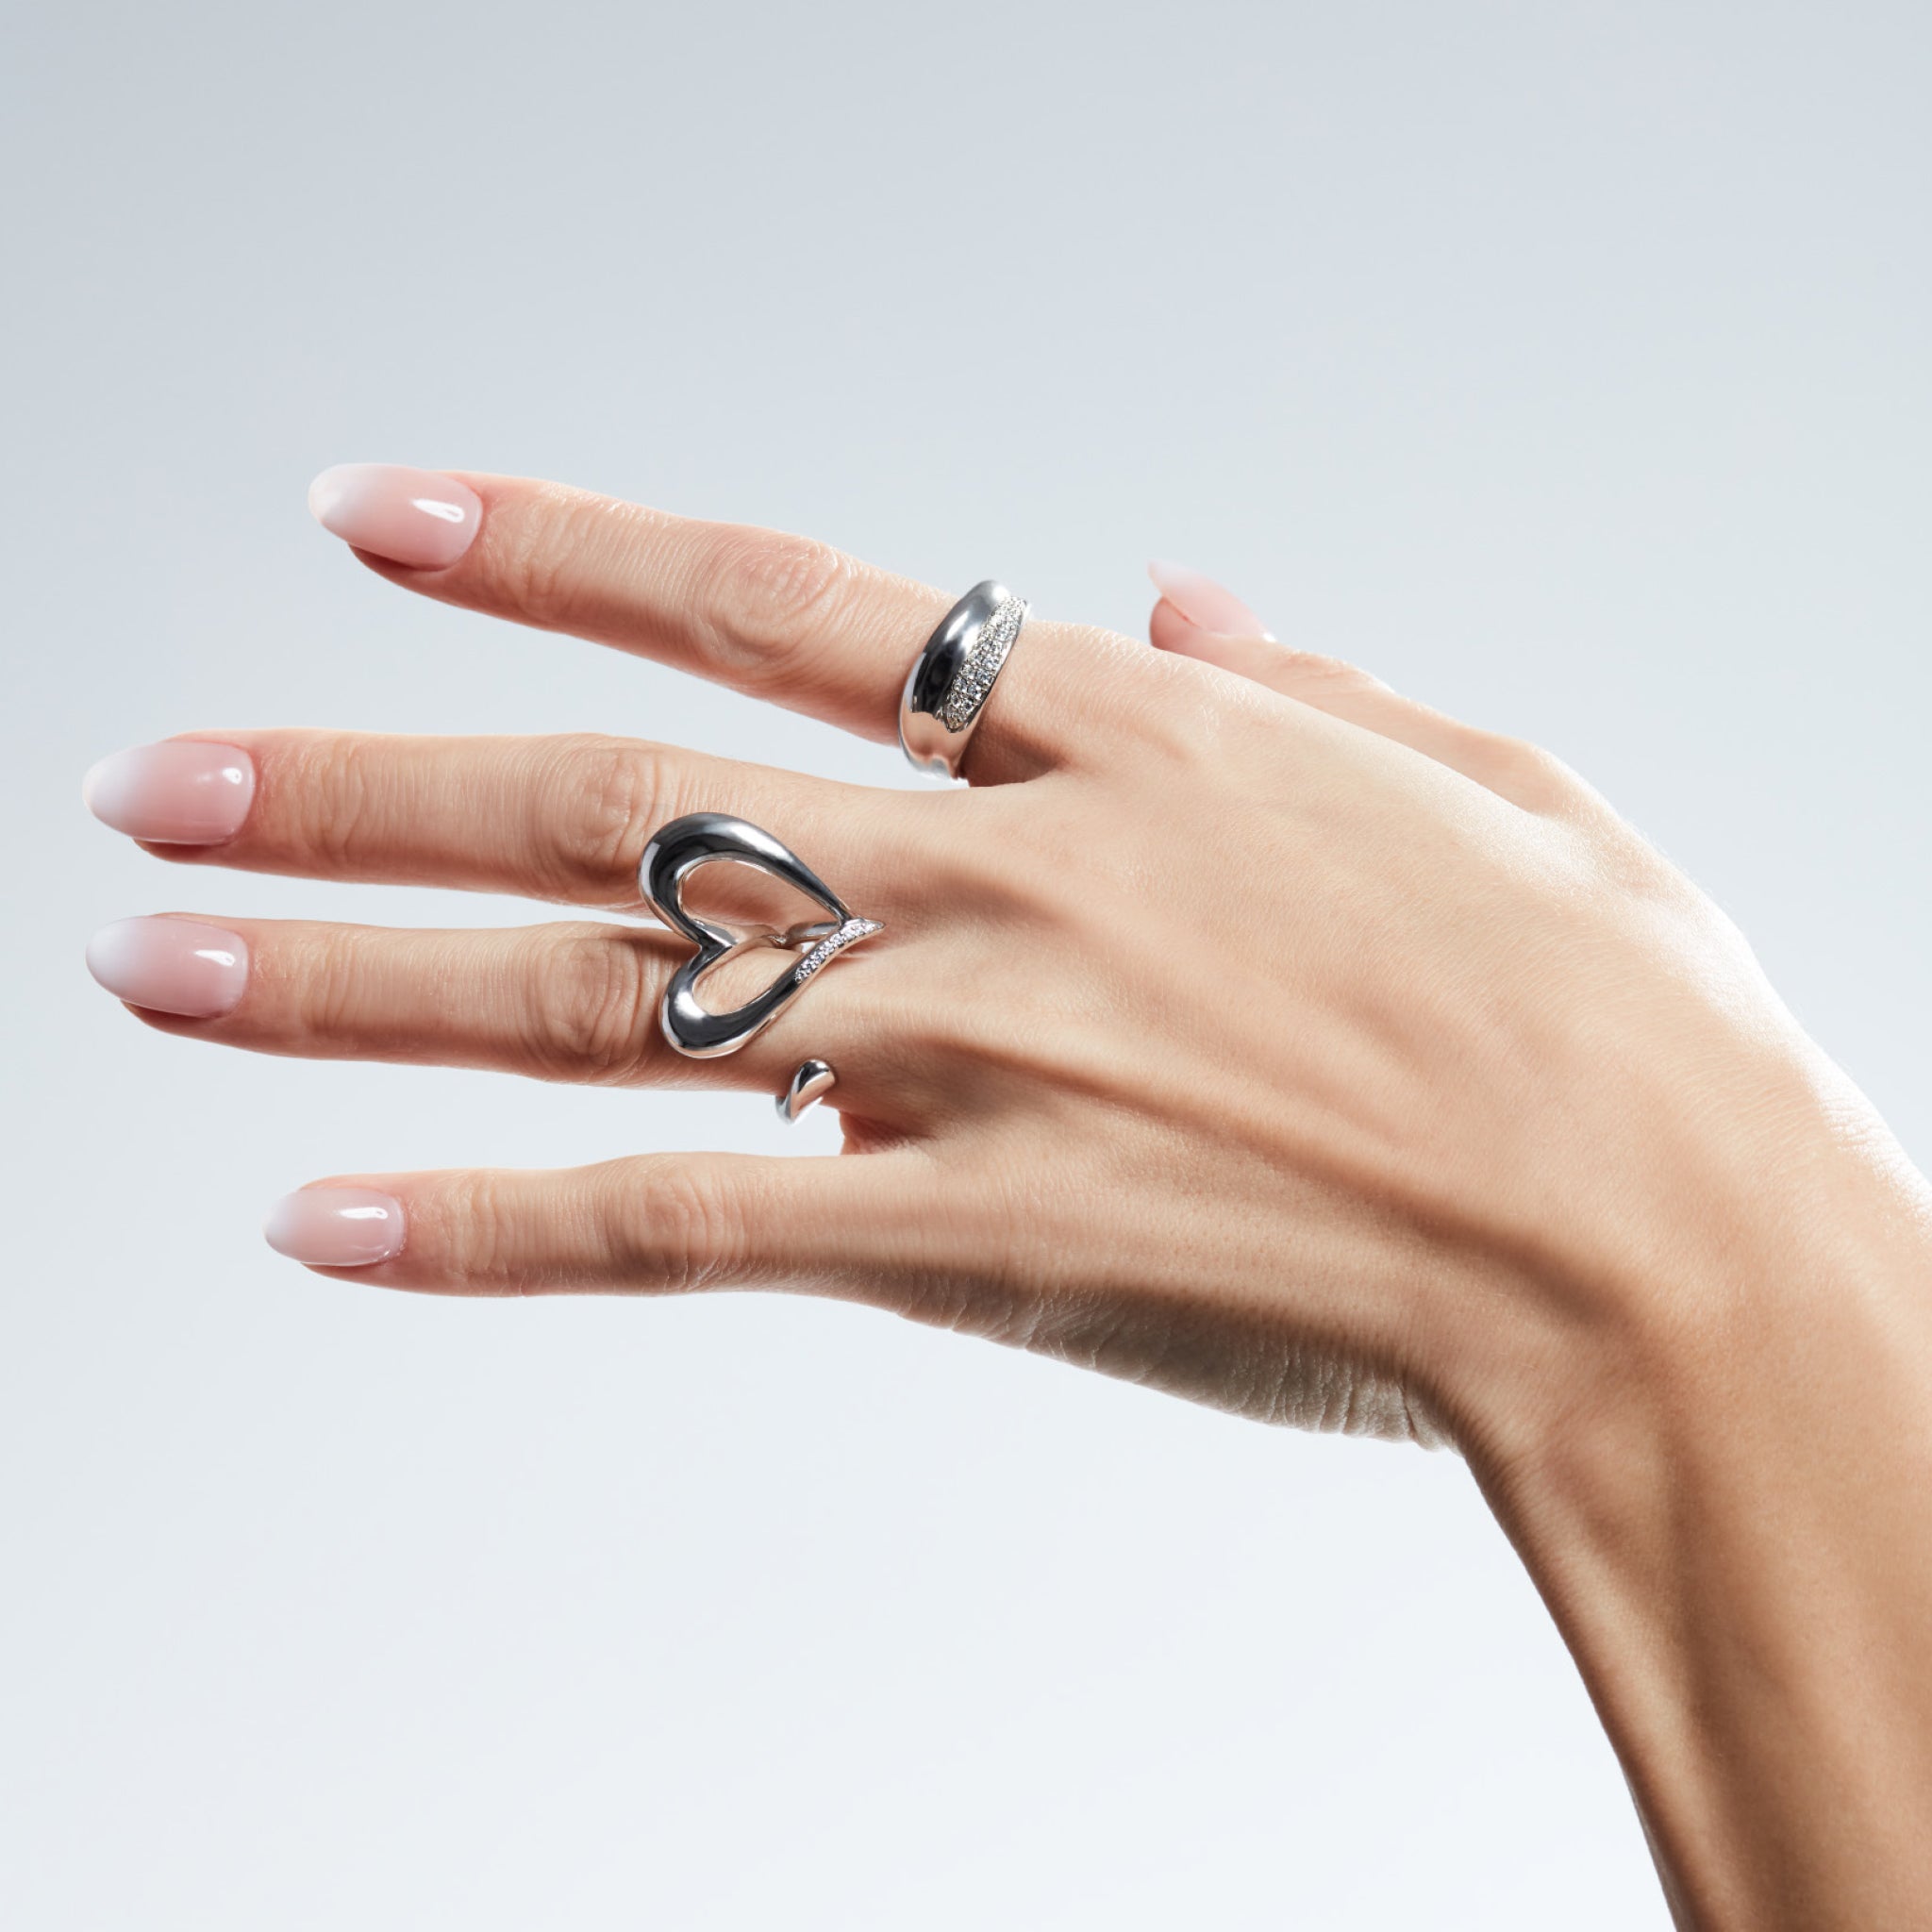 Eros Open Heart Two-Finger Ring with Diamonds